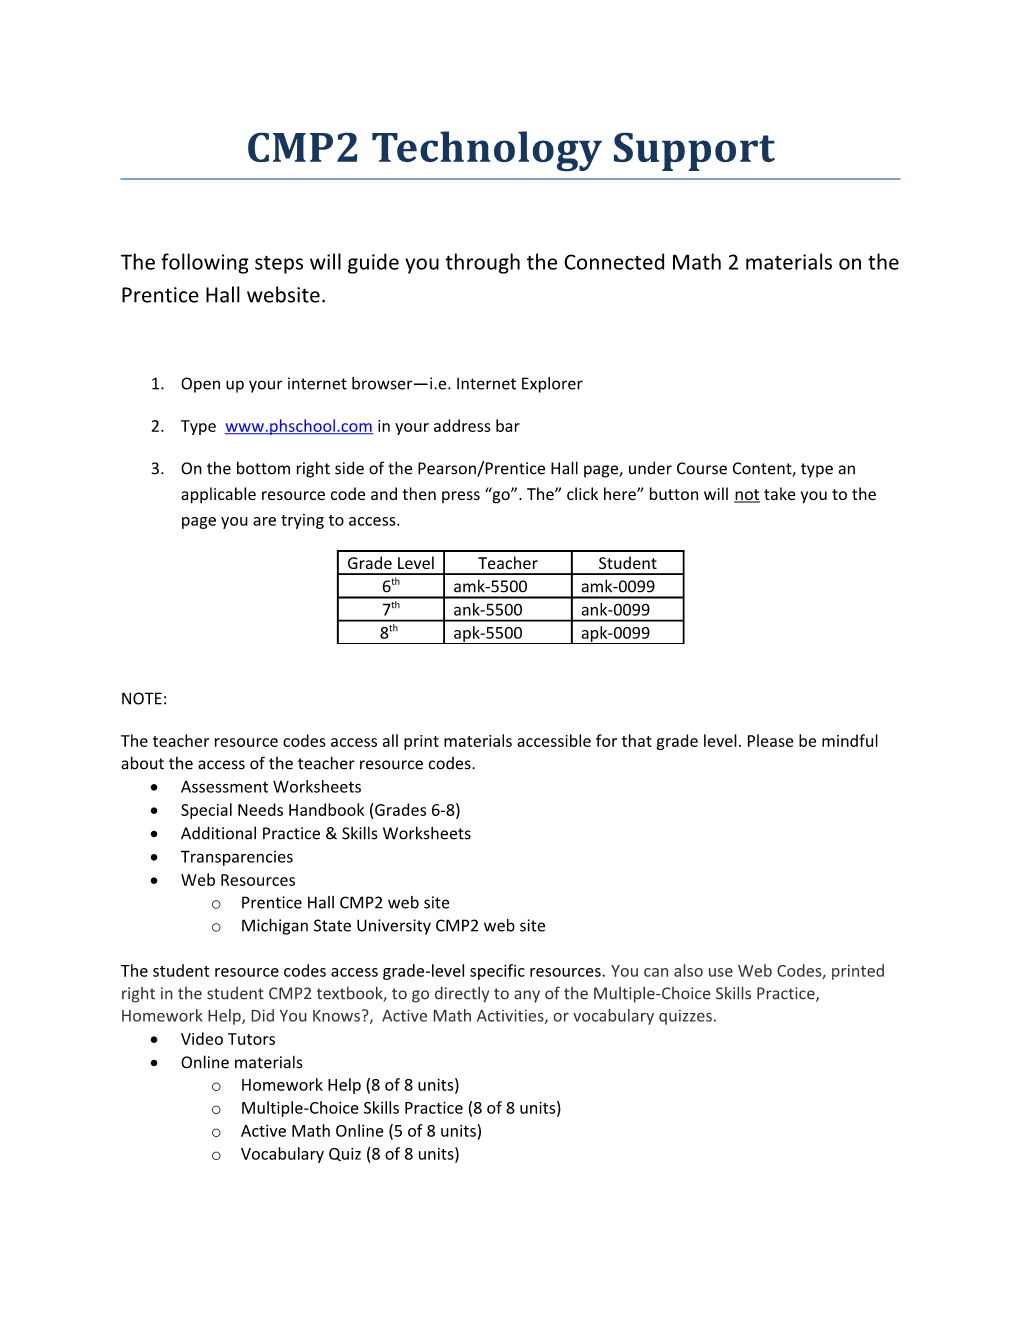 CMP2 Technology Support - How to Access